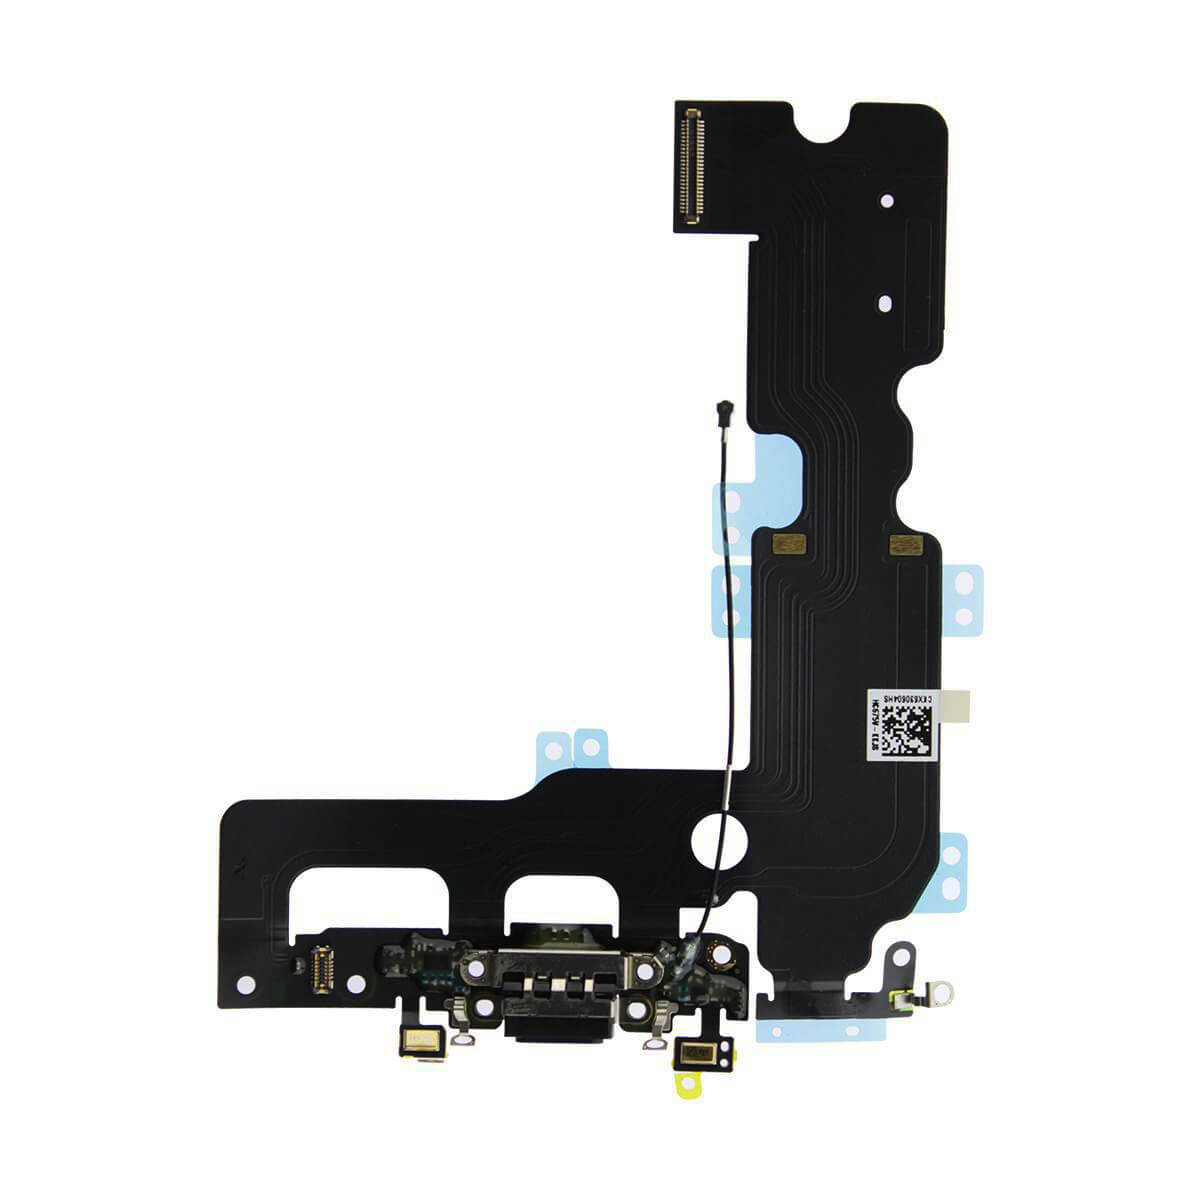 https://phonedoctors.com/wp-content/uploads/iphone-7-plus-charging-dock-port-assembly-replacement-black_472554672.jpg